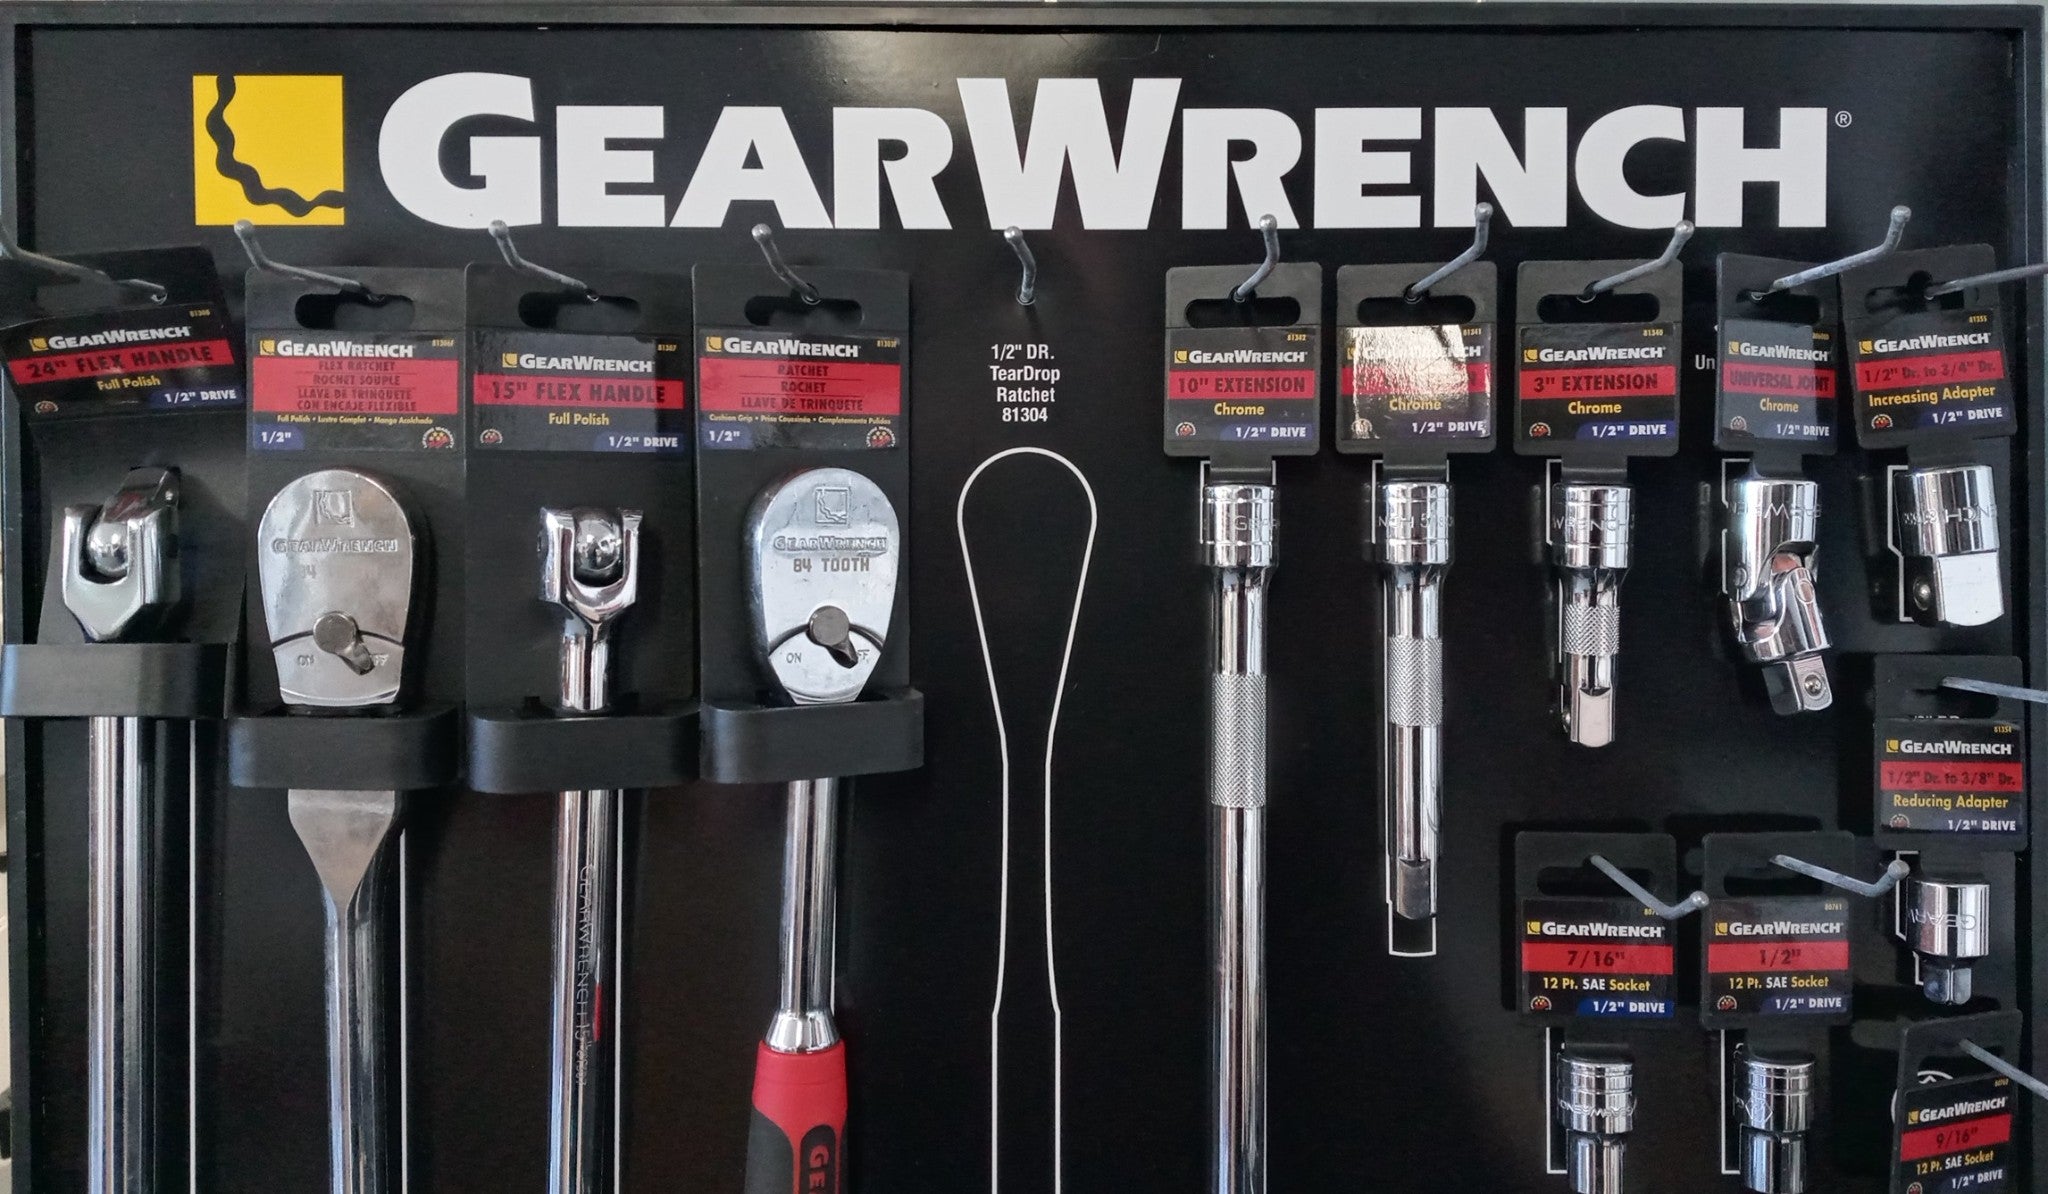 GearWrench 81435 Merchandiser Display 30pc 1/2 Drive Ratchet and Sock